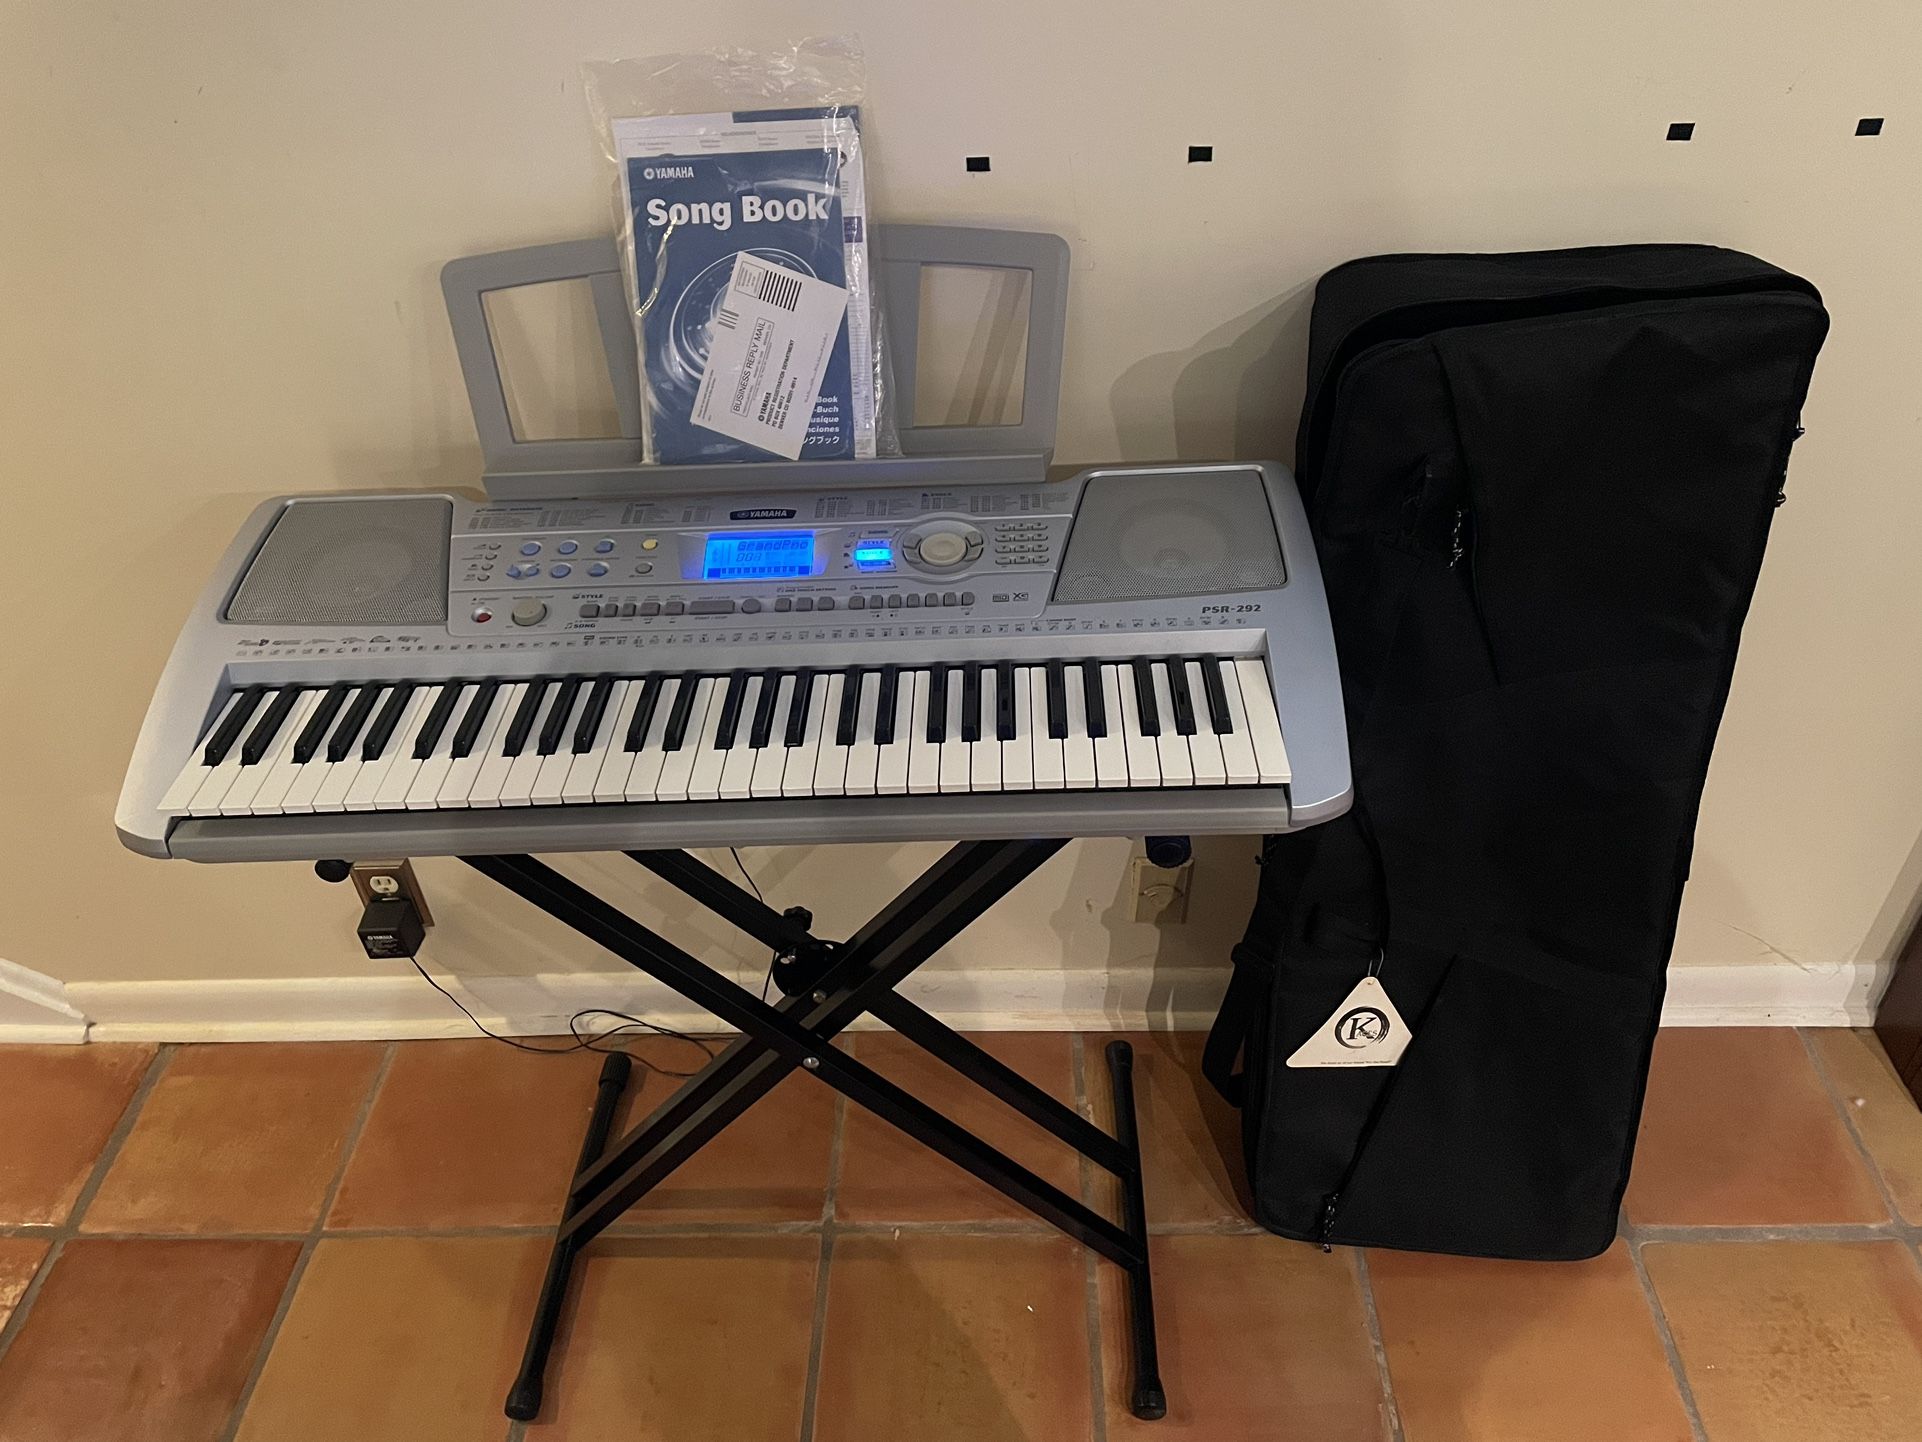 Yamaha PSR-292 Portatone Electronic Keyboard/Piano with 61 keys, Stand, Power Cord, Owner’s Manual, Songbook, and “Kaces” Travel Bag Included!